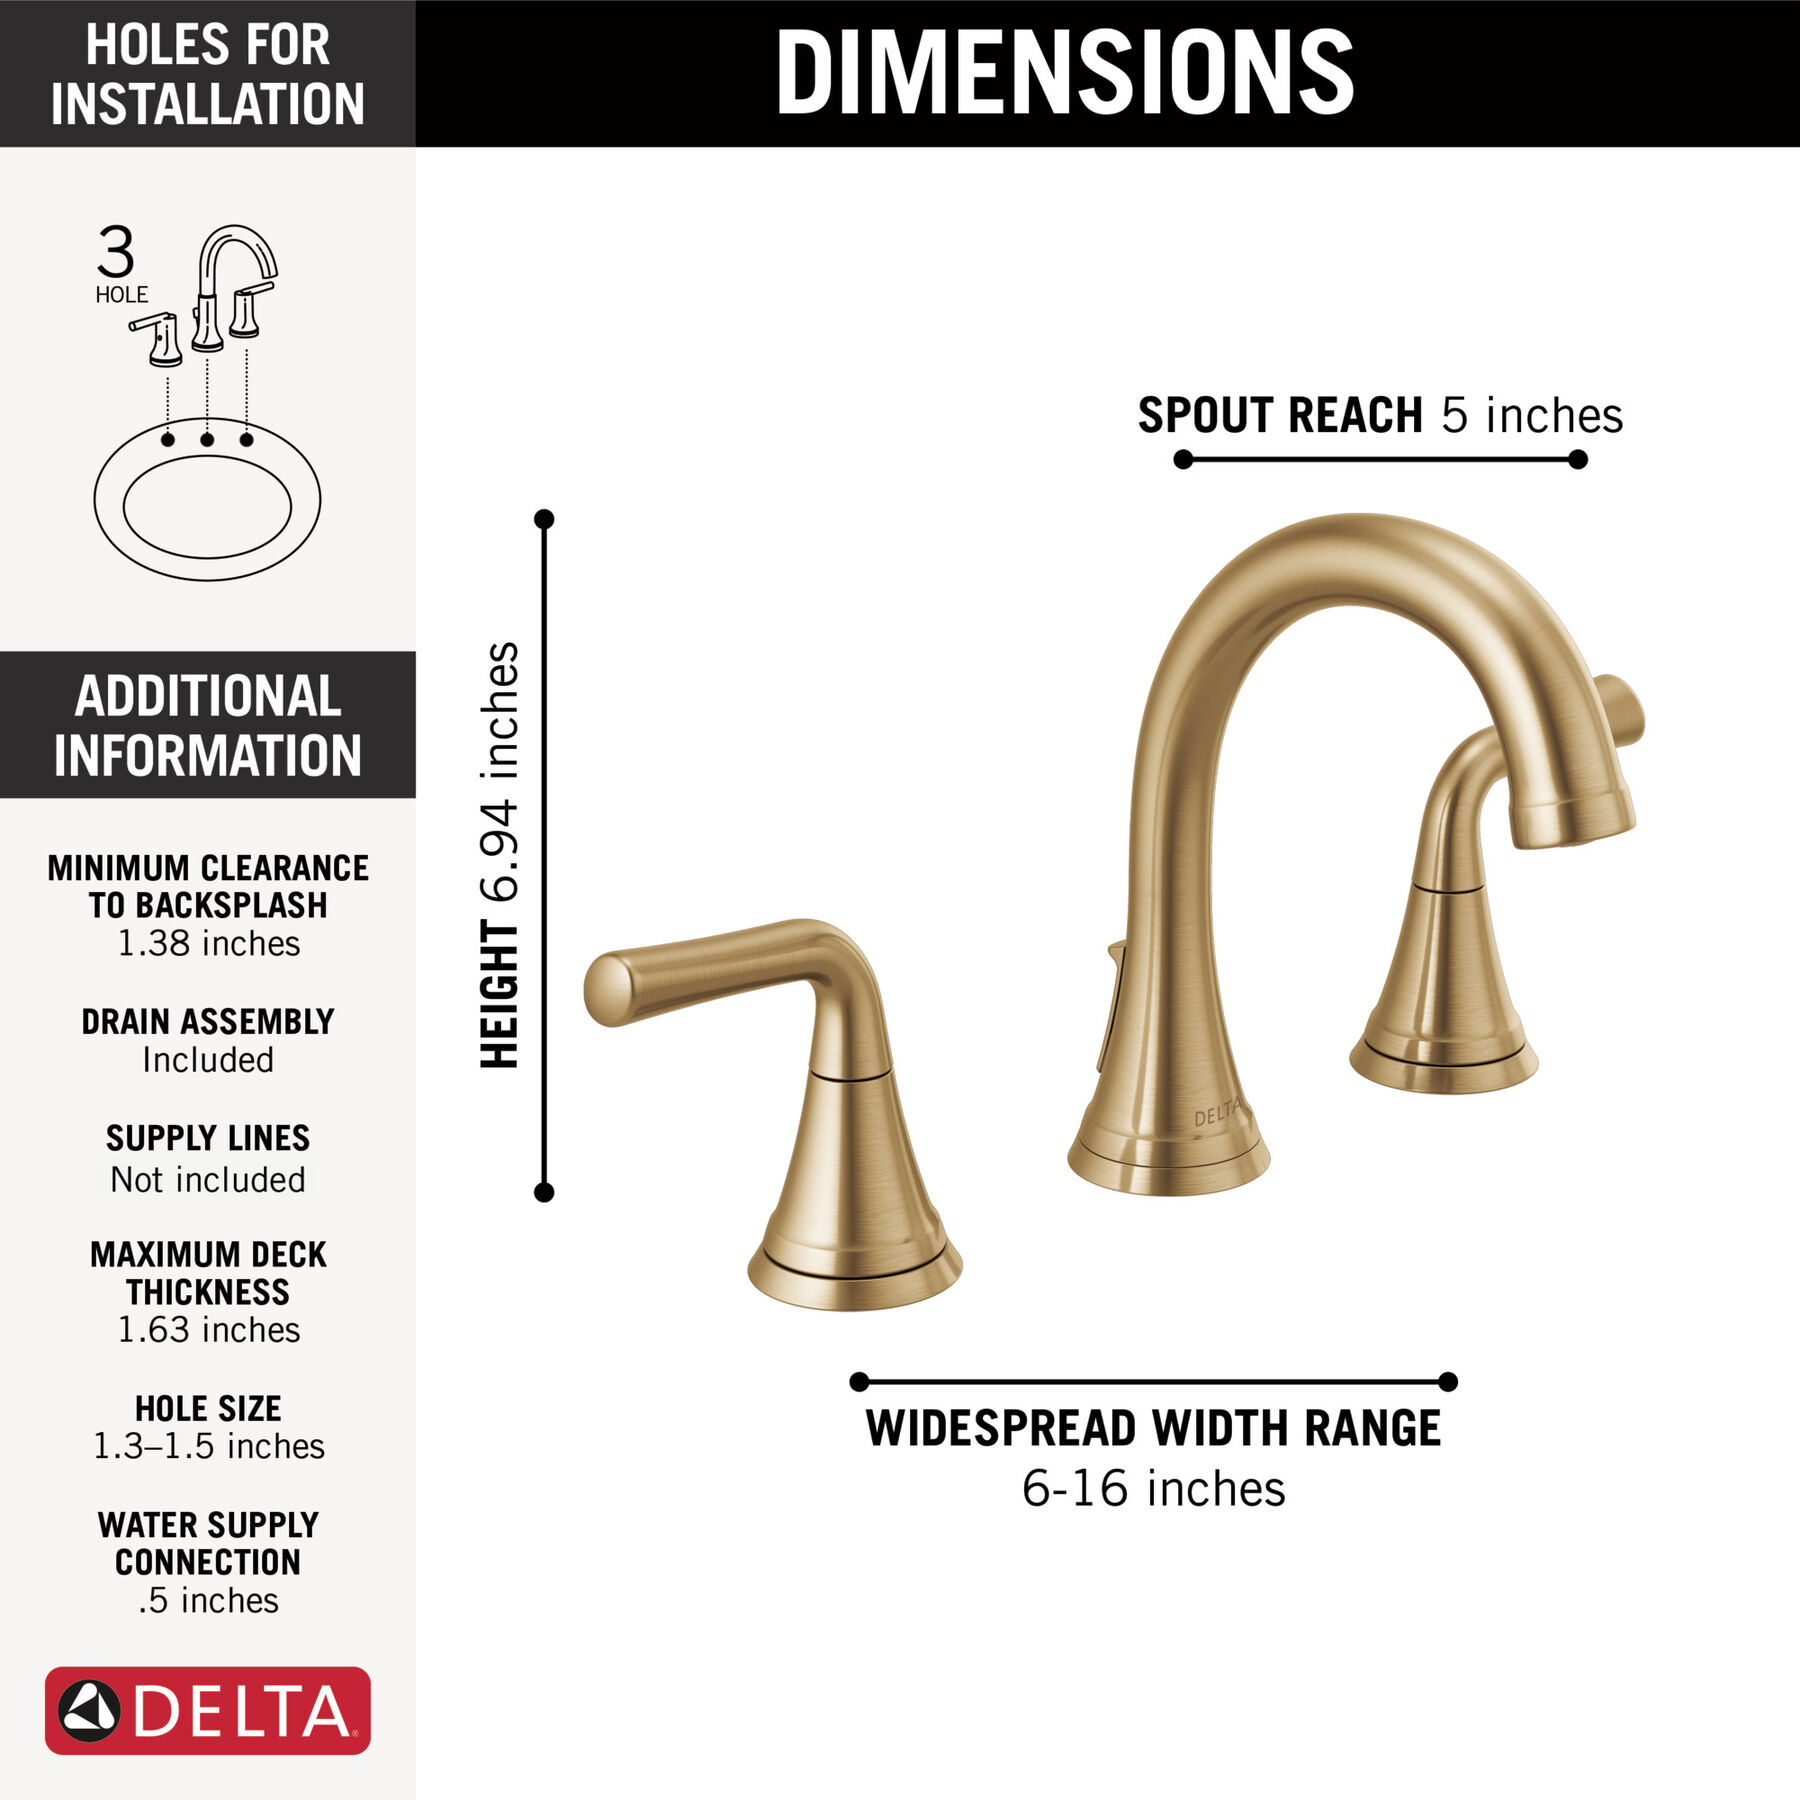 Two Handle Widespread Bathroom Faucet in Champagne Bronze